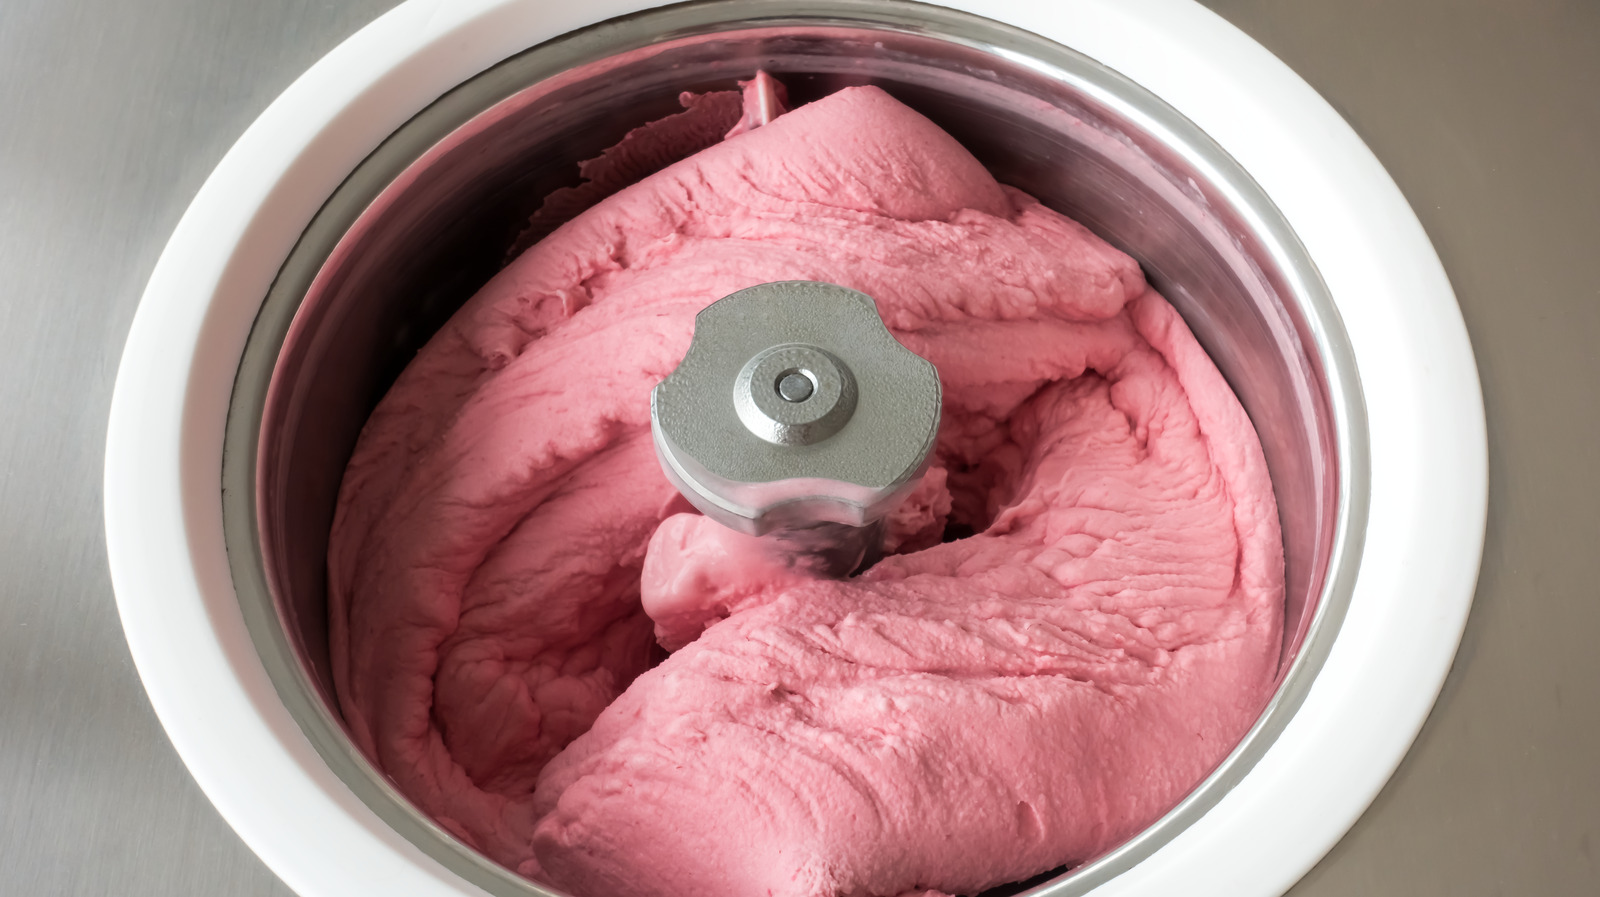 https://www.tastingtable.com/img/gallery/15-mistakes-youre-making-with-homemade-ice-cream/l-intro-1683736534.jpg